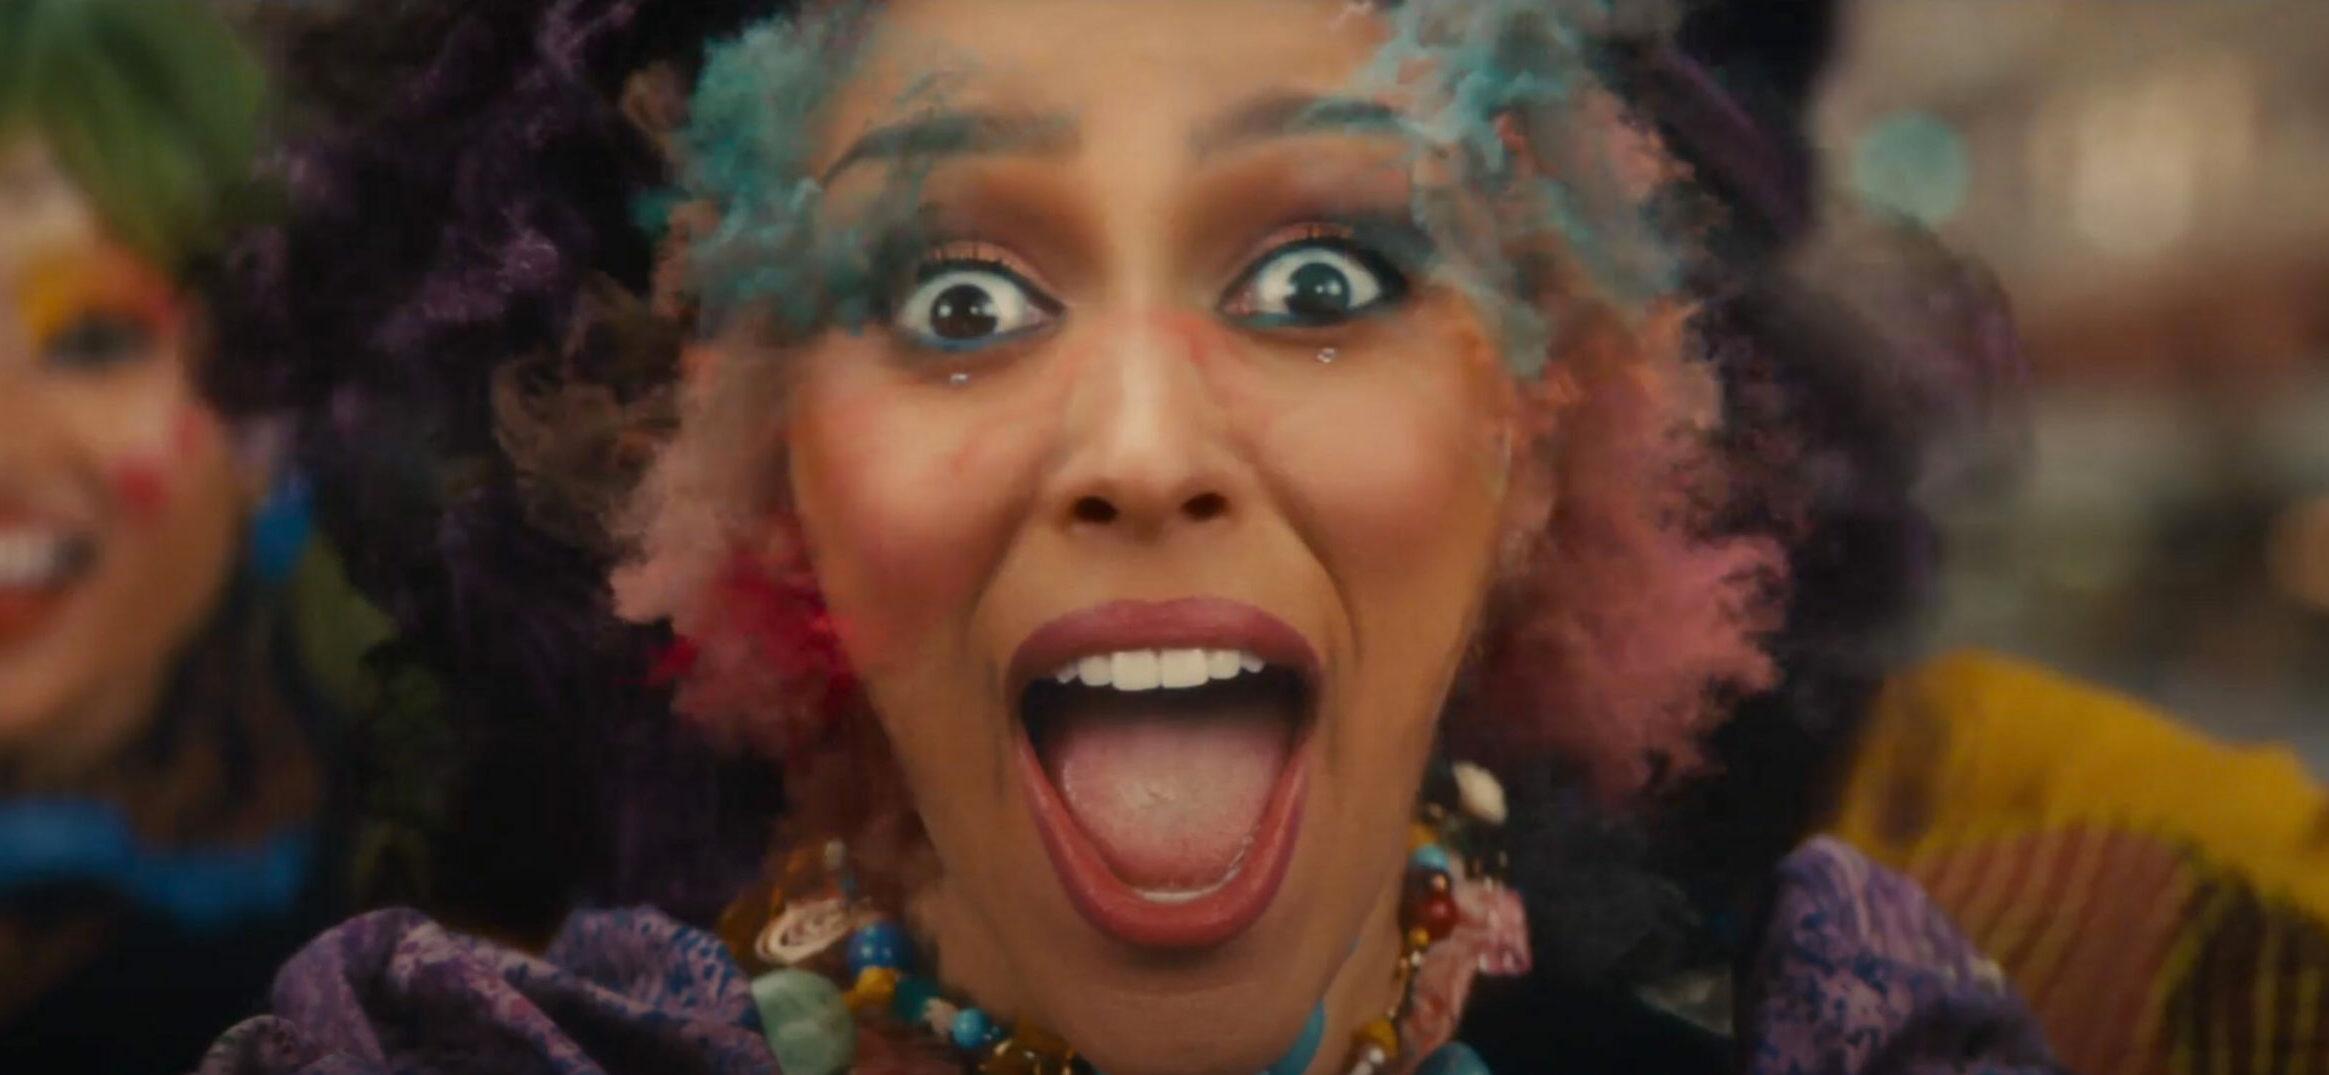 Doja Cat clowns around in Taco Bell s Super Bowl commercial featuring her cover of Hole s Celebrity Skin